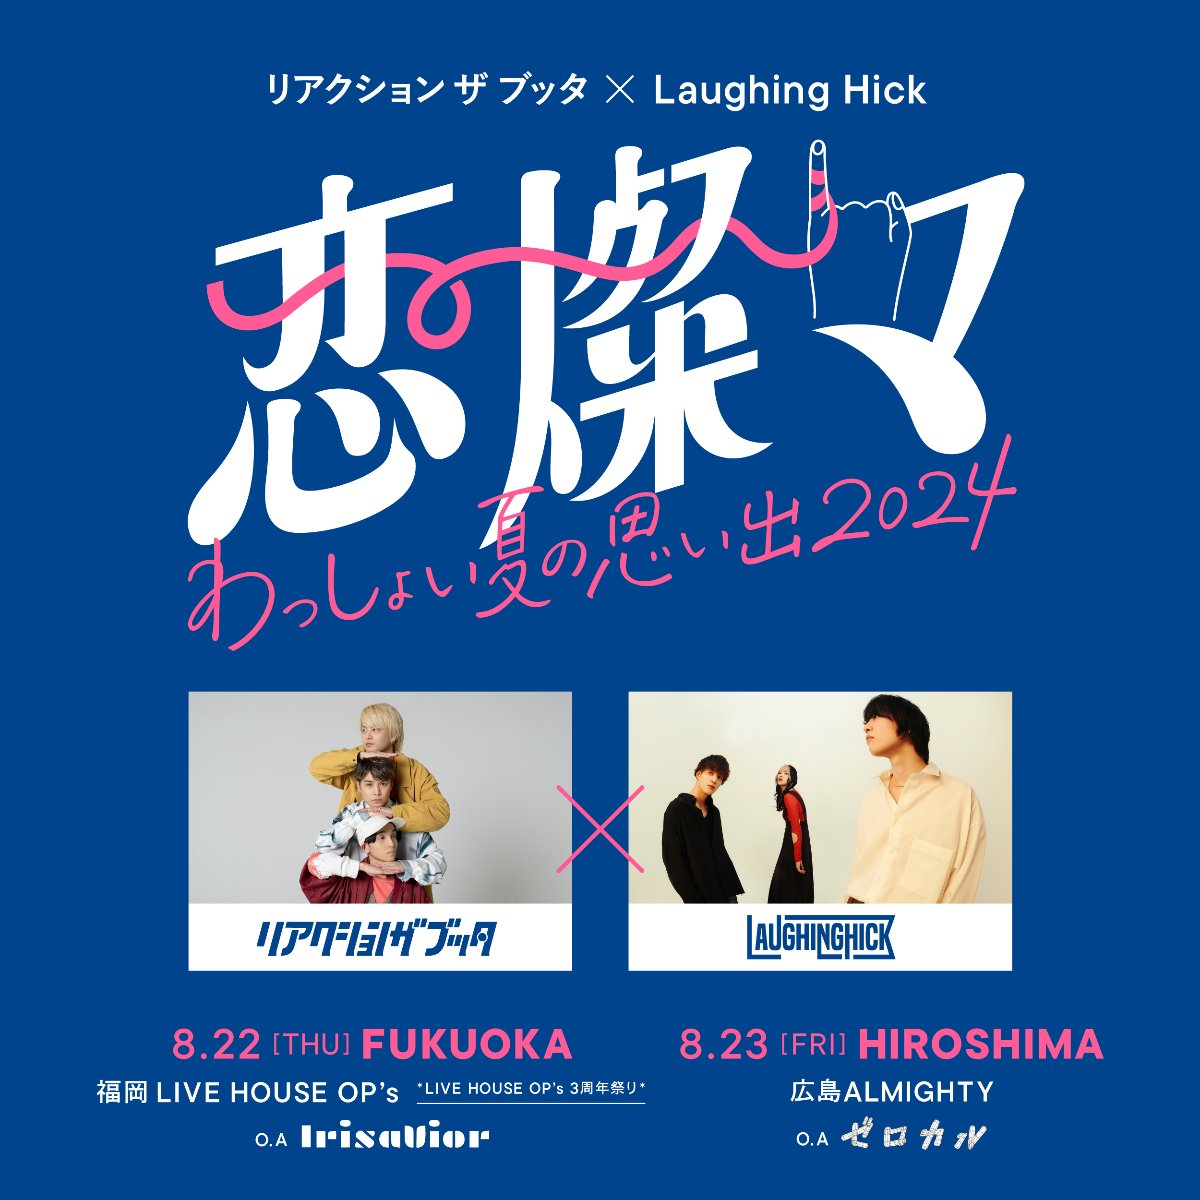 Laughing Hick lit.link(リットリンク)